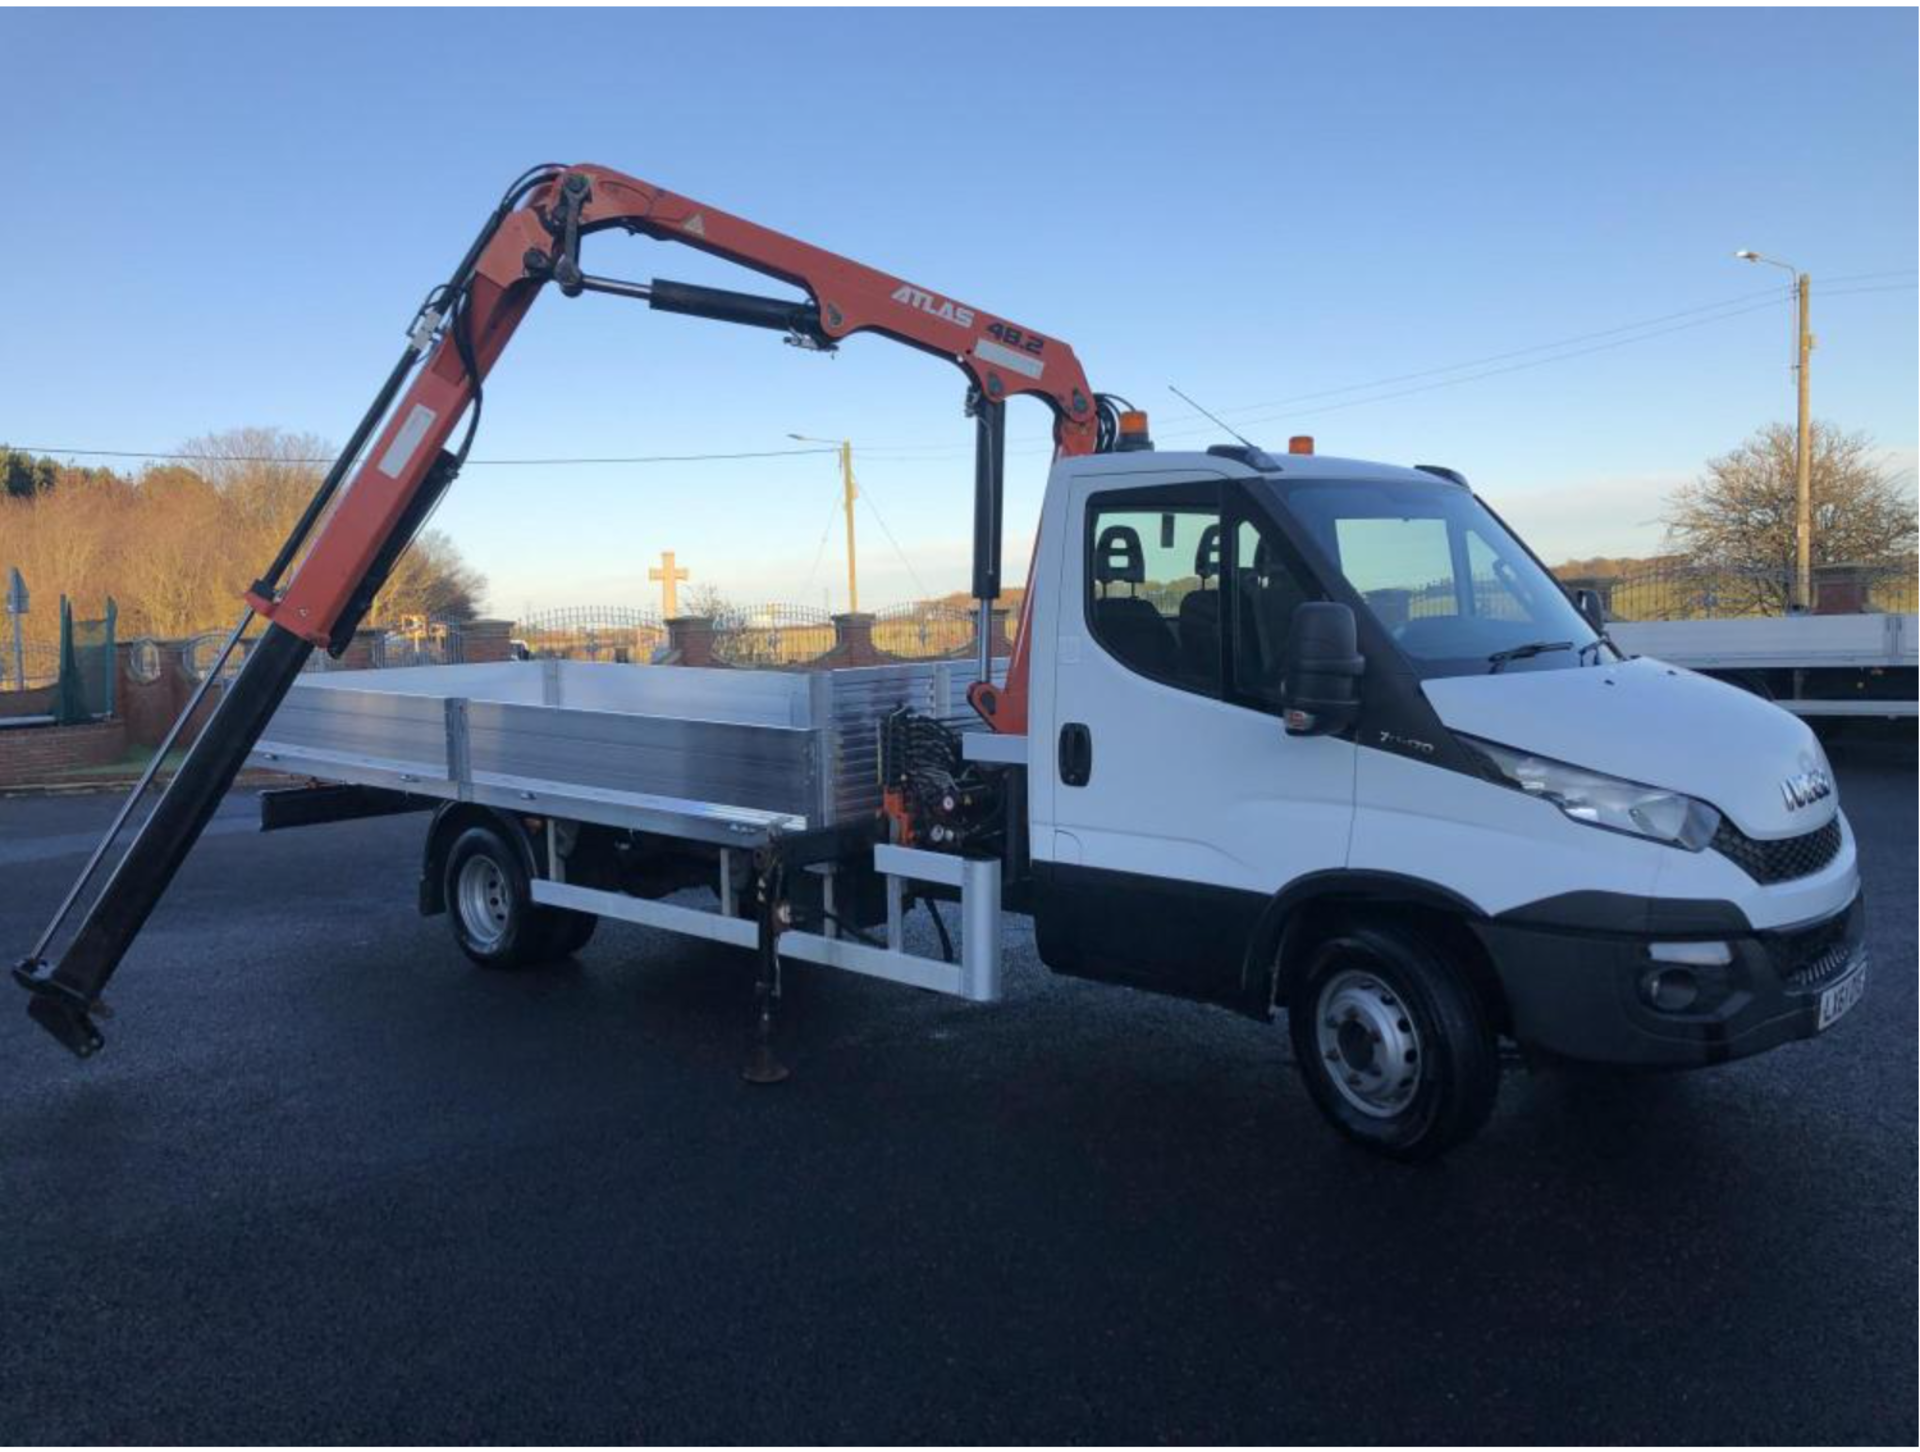 2014/ 64 PLATE IVECO DAILY 70-170 7TON GROSS, DROP SIDE BODY WITH ATLAS TEREX 48.2 CRANE *PLUS VAT* - Image 10 of 20